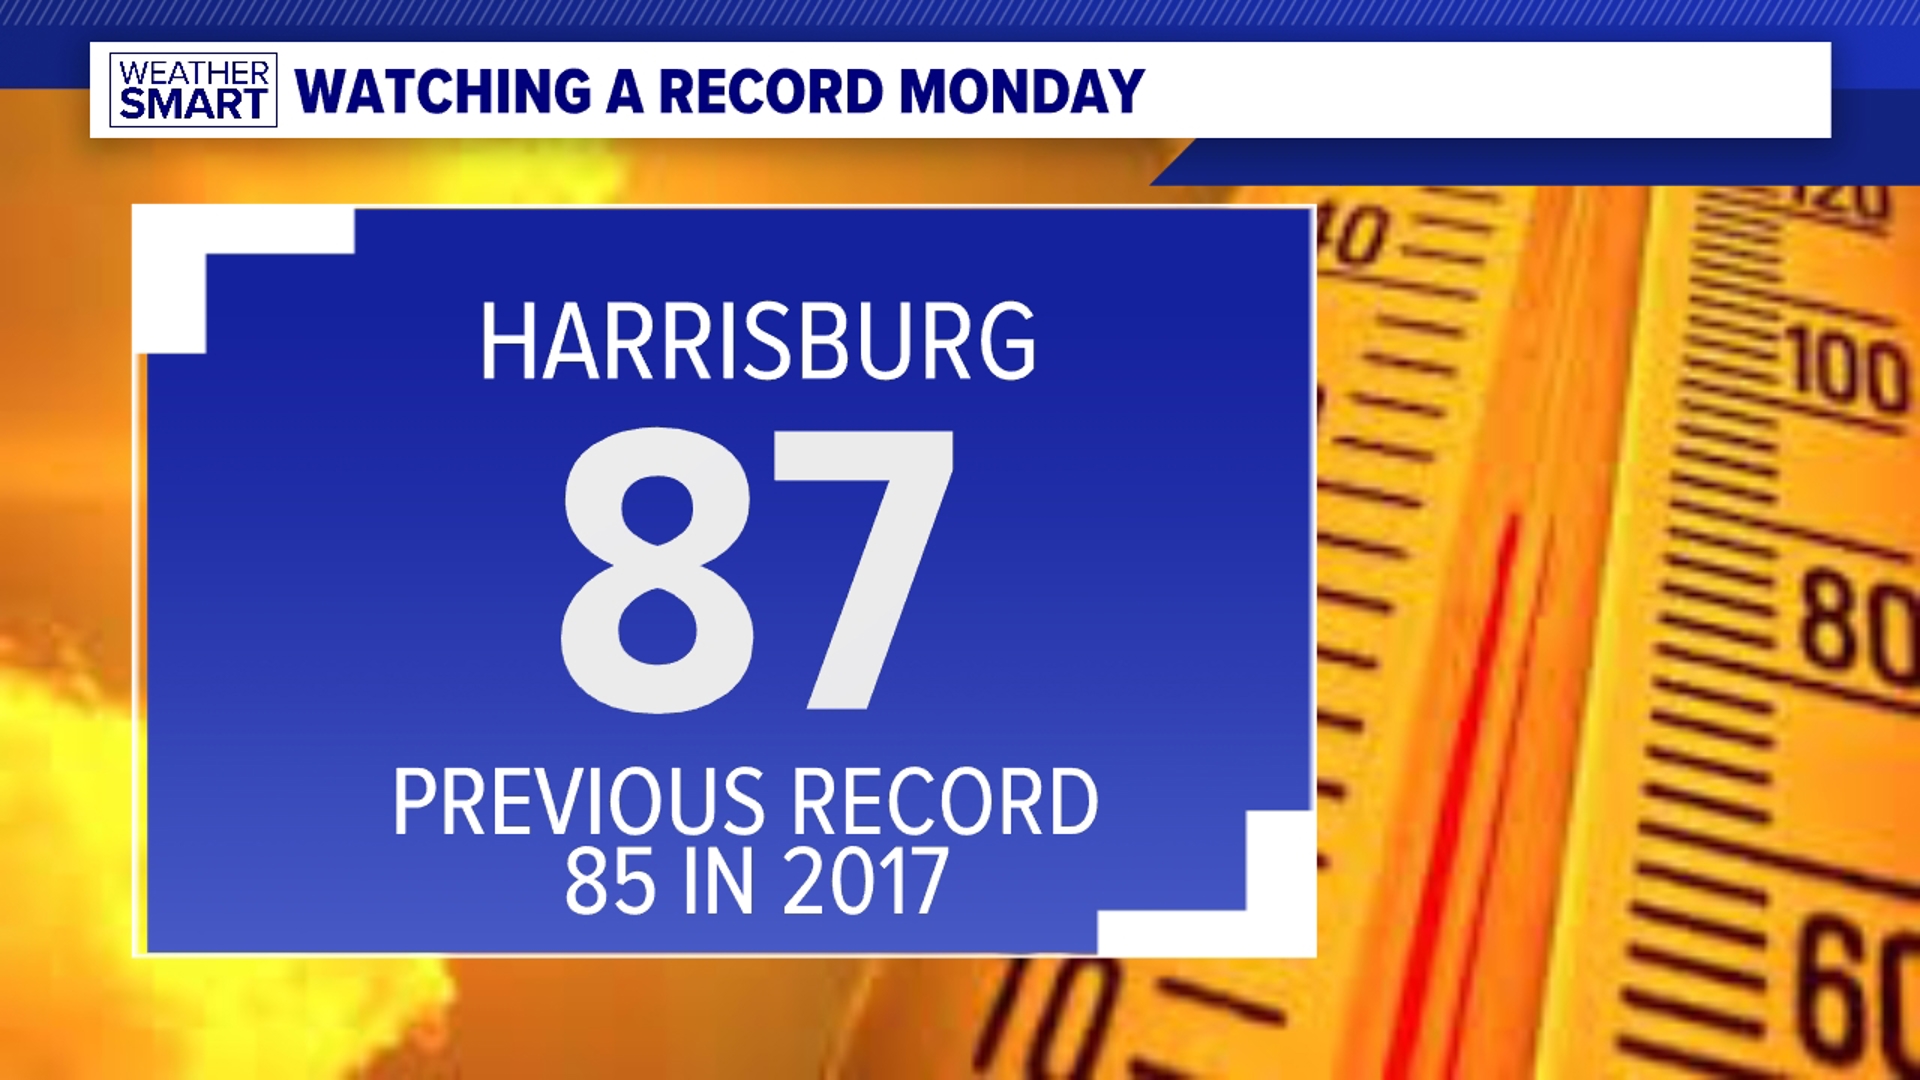 Temperatures head for record breaking levels Monday with sun and clouds! Humidity will also be noticeable as well, so be sure to stay hydrated.